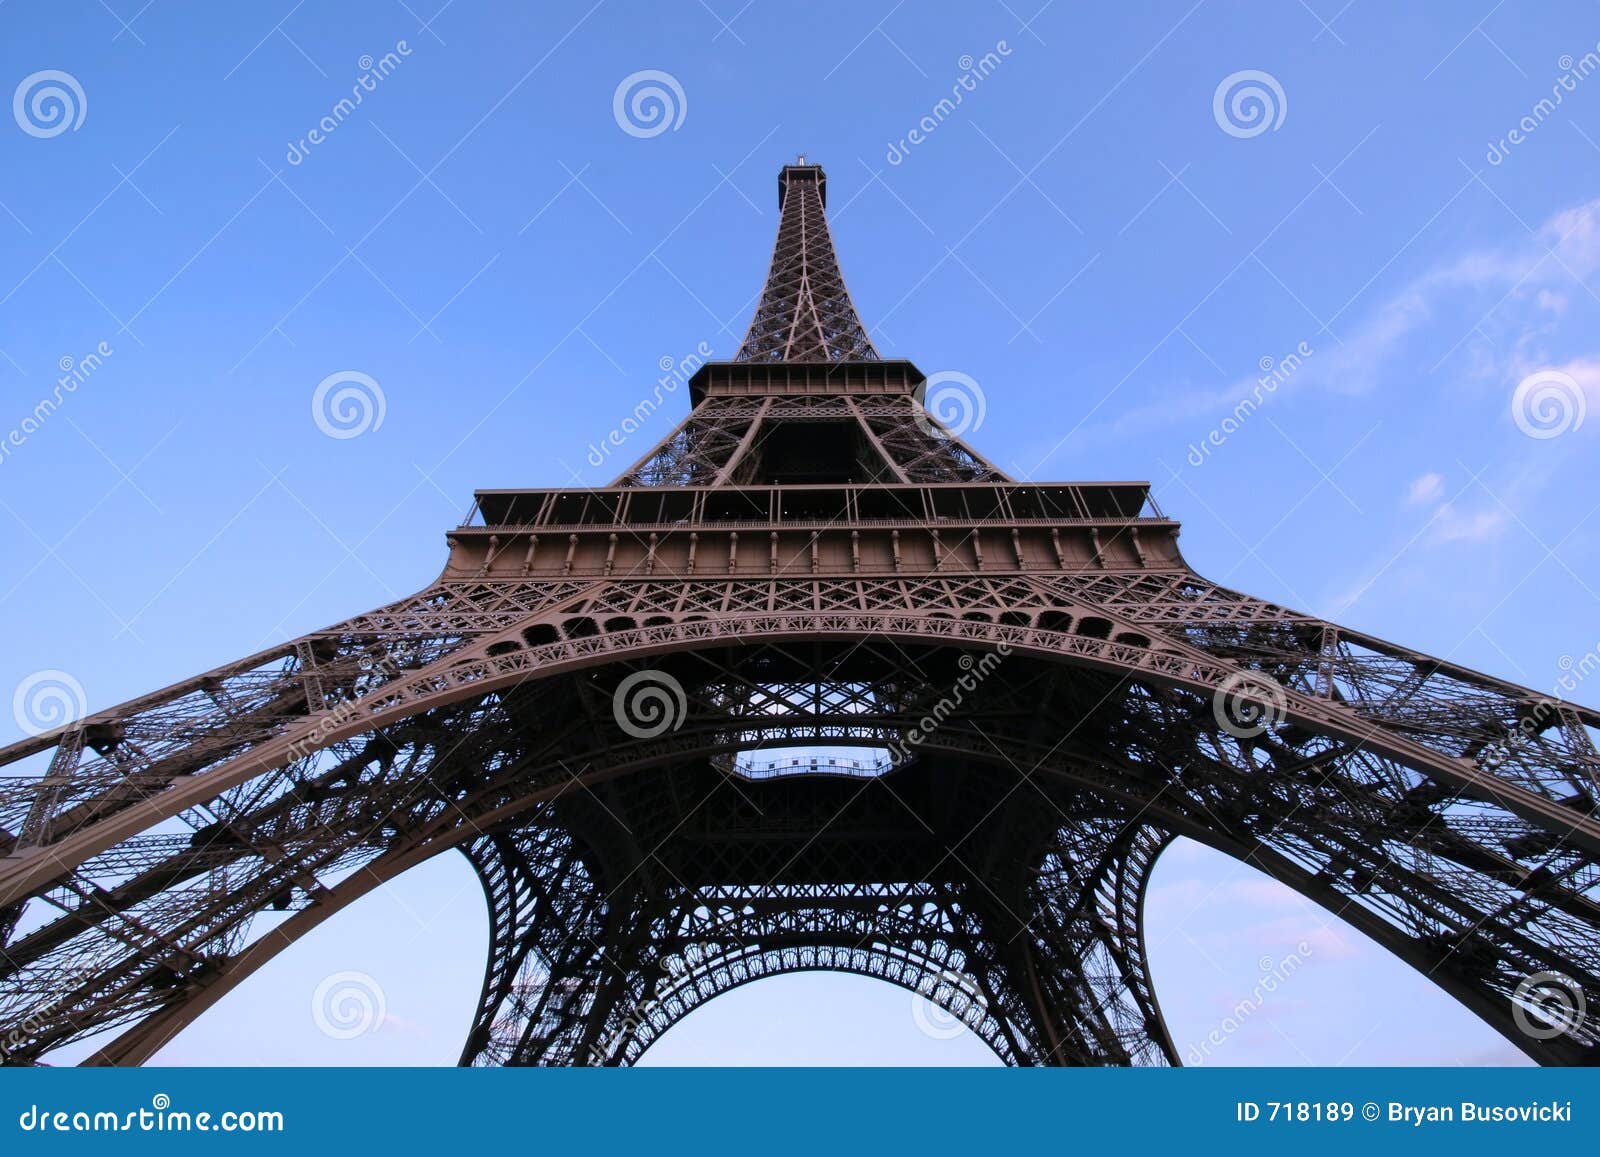 Eiffel Tower wide angle stock image. Image of historic - 718189